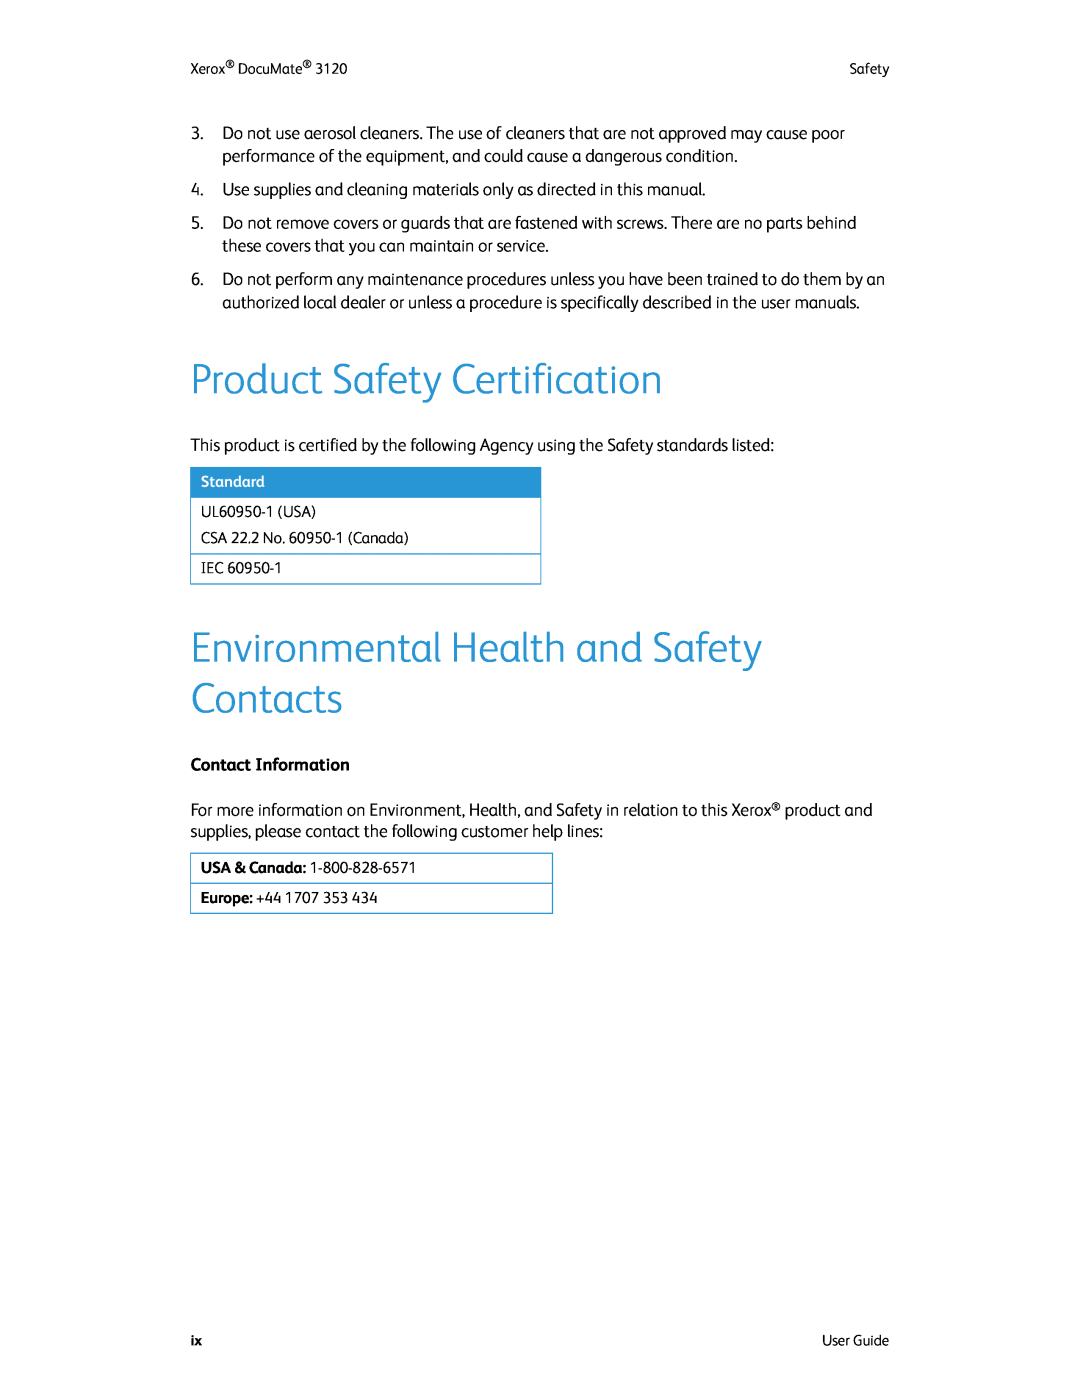 Xerox xerox manual Product Safety Certification, Environmental Health and Safety Contacts, Contact Information 